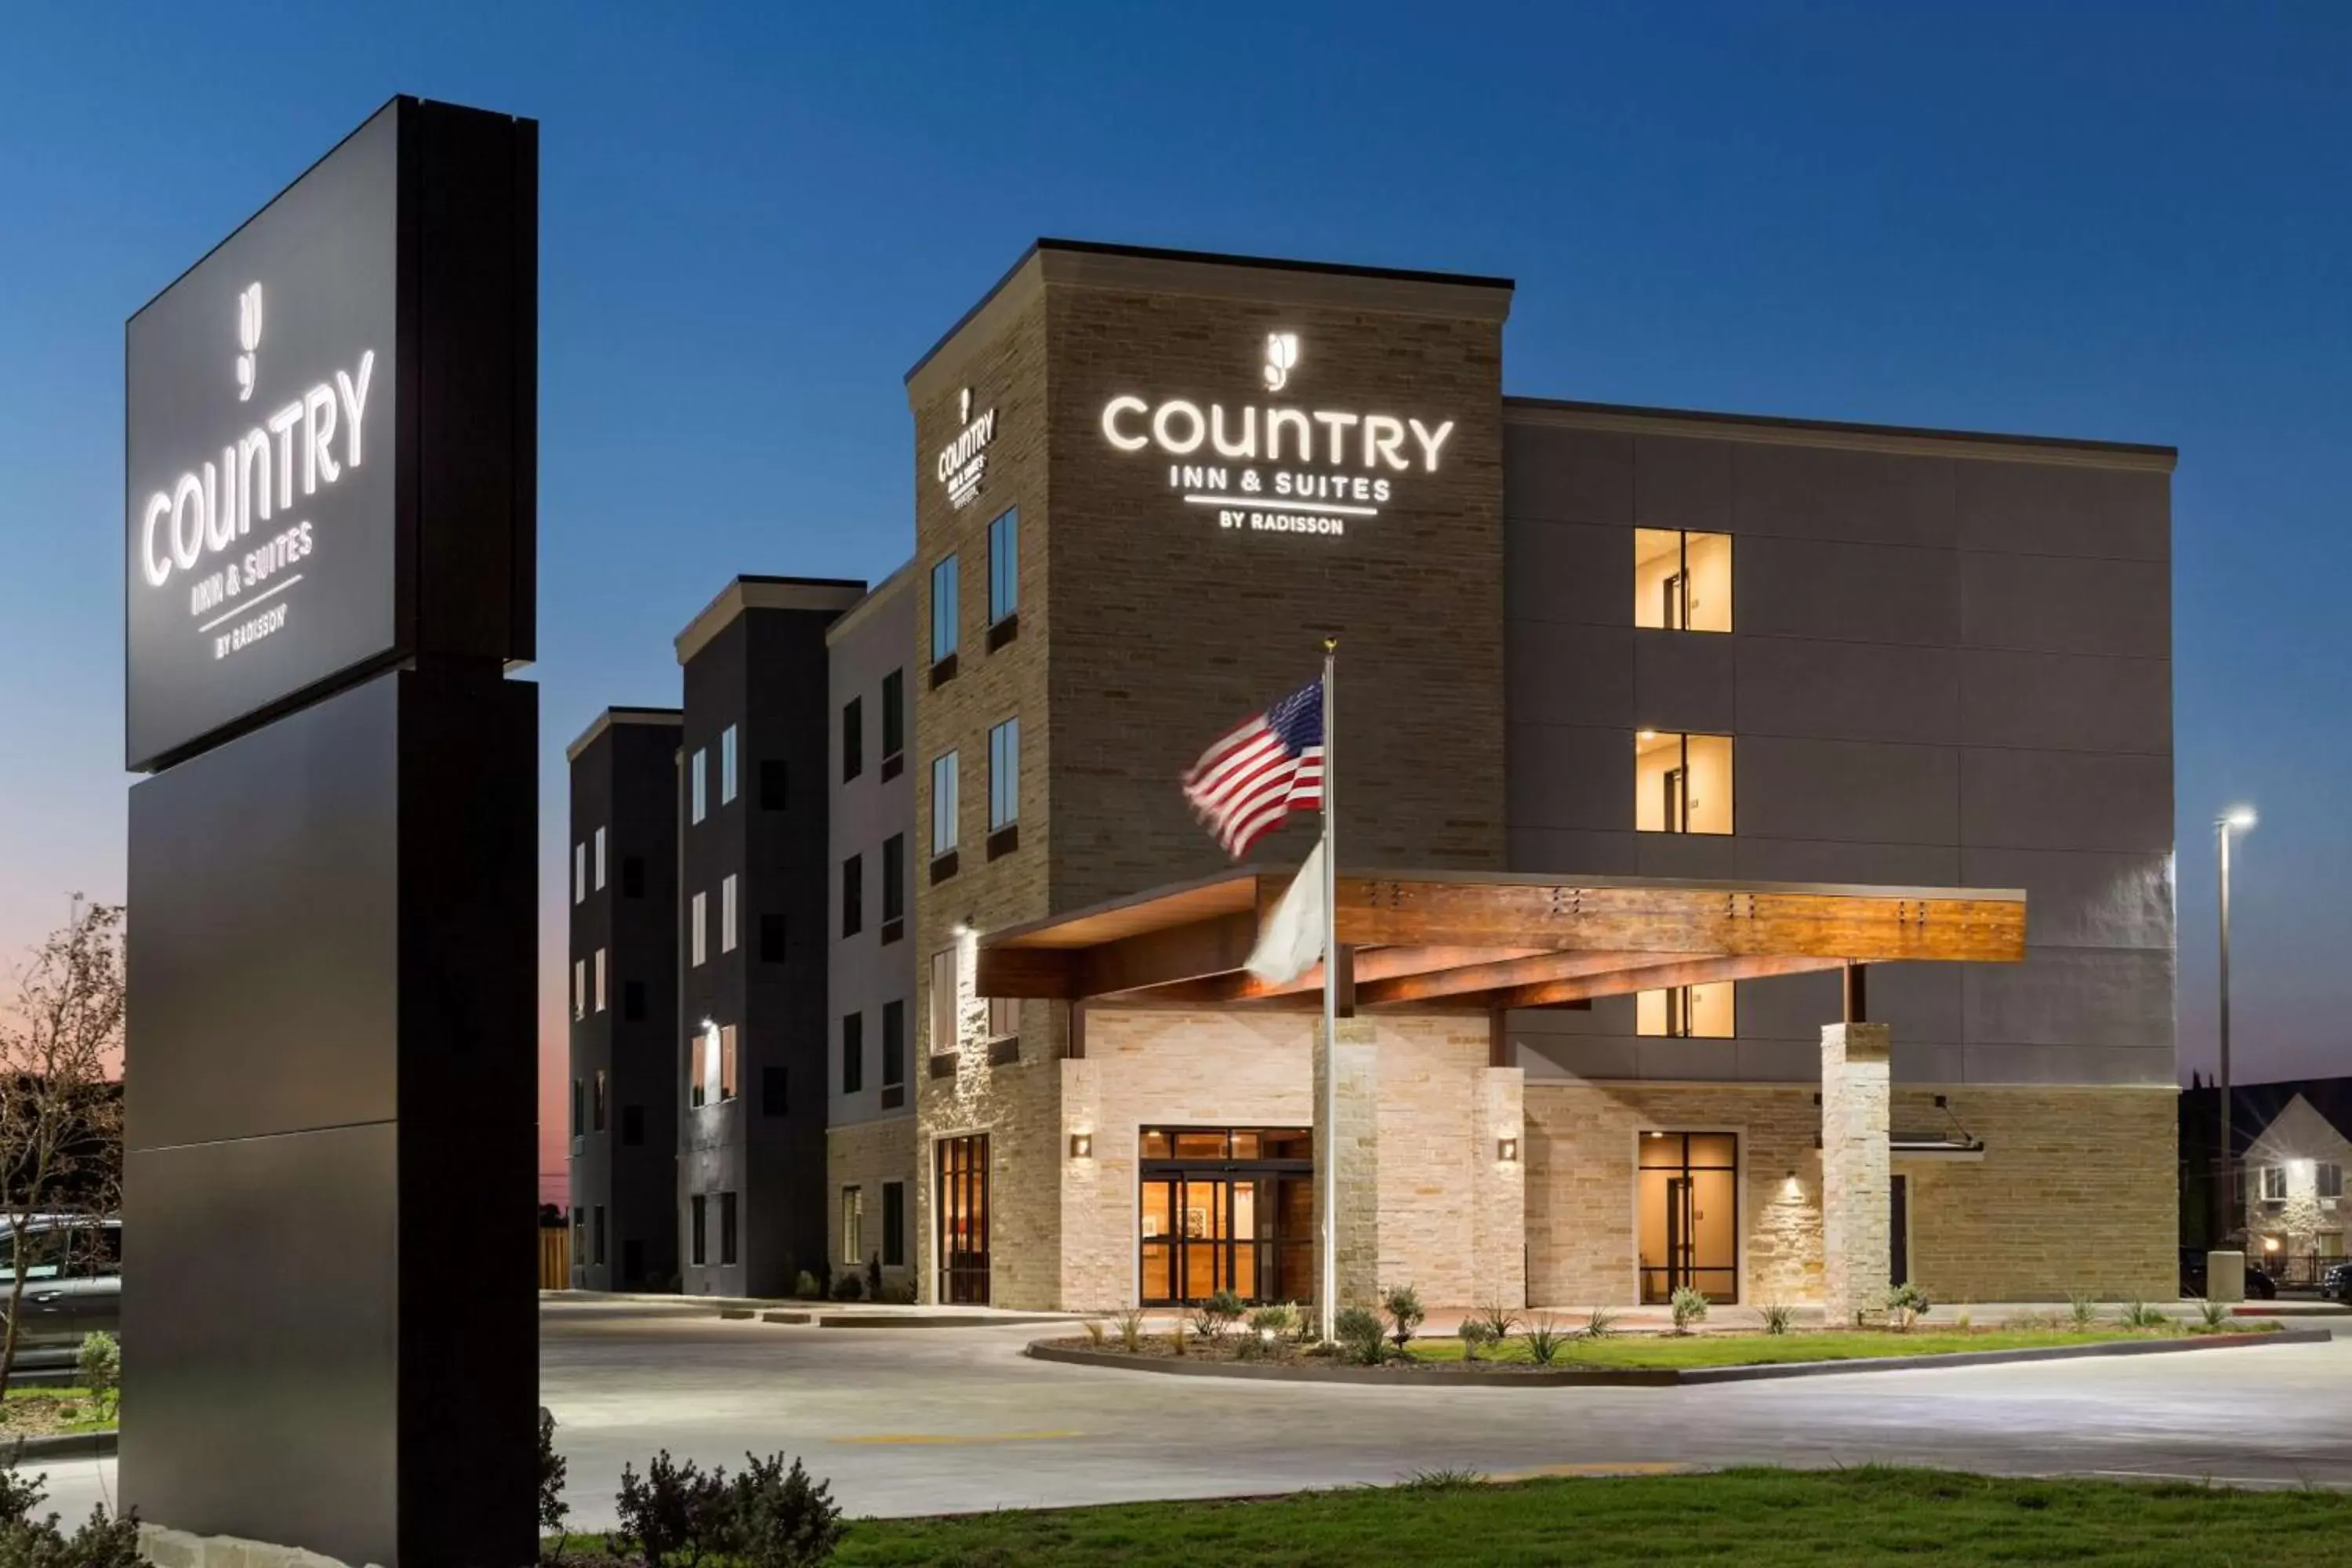 Property building in Country Inn & Suites by Radisson, New Braunfels, TX